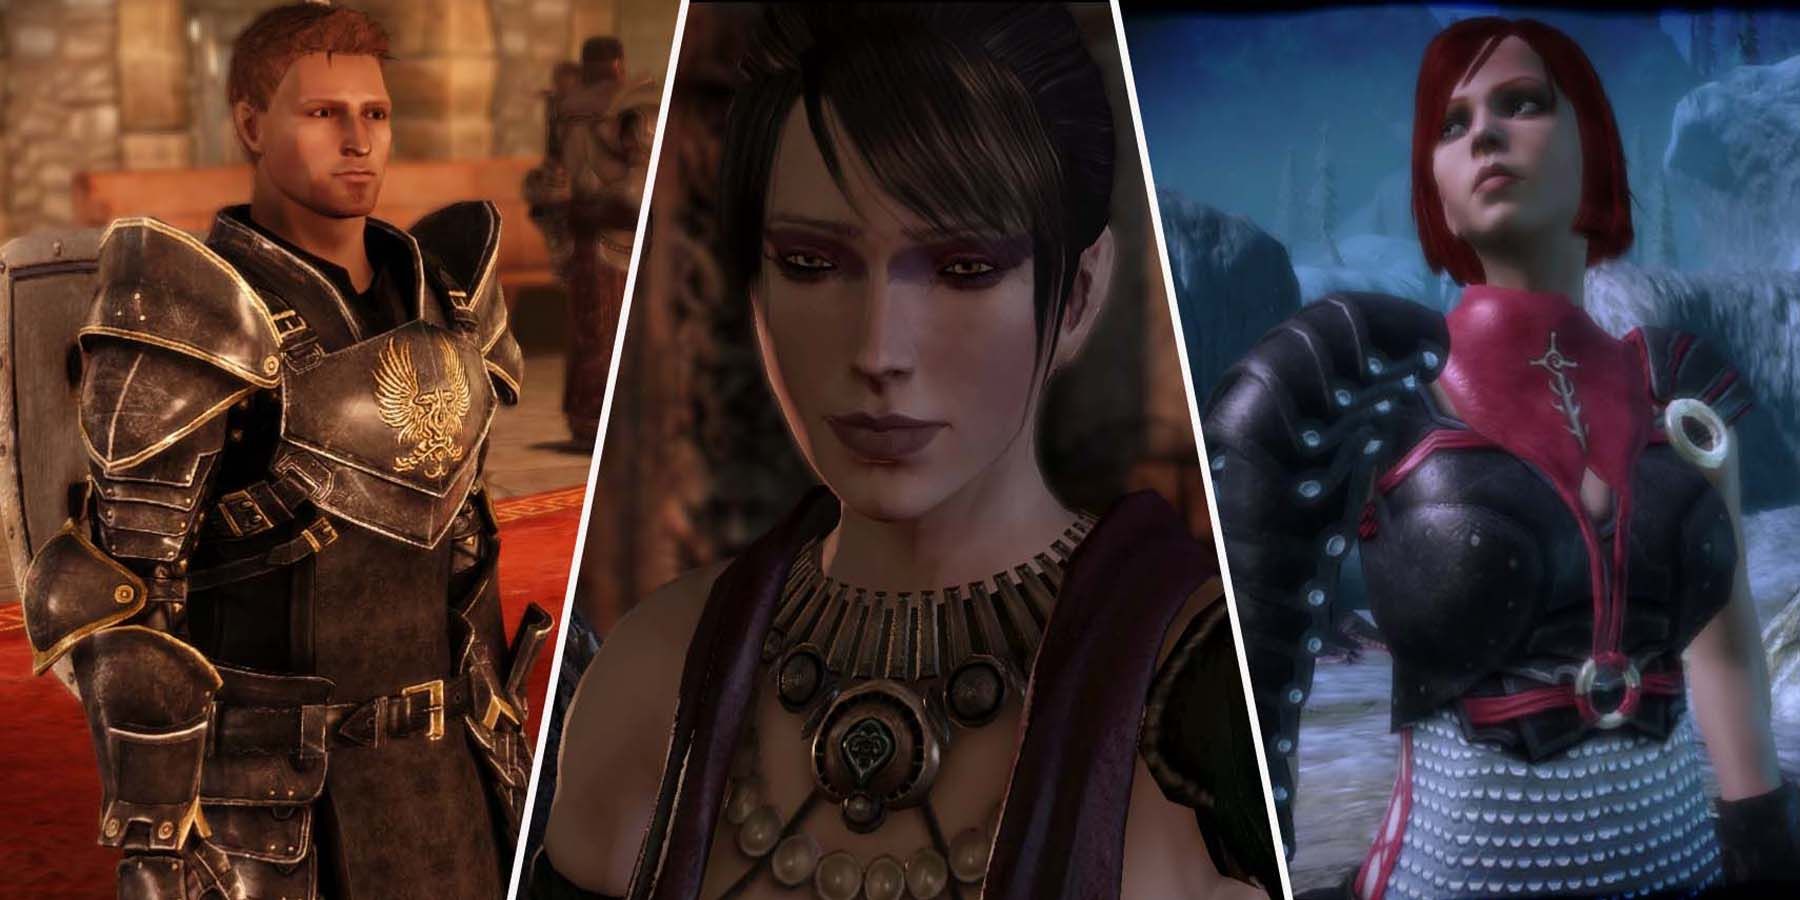 chad mcmurry recommends Dragon Age Adult Mods